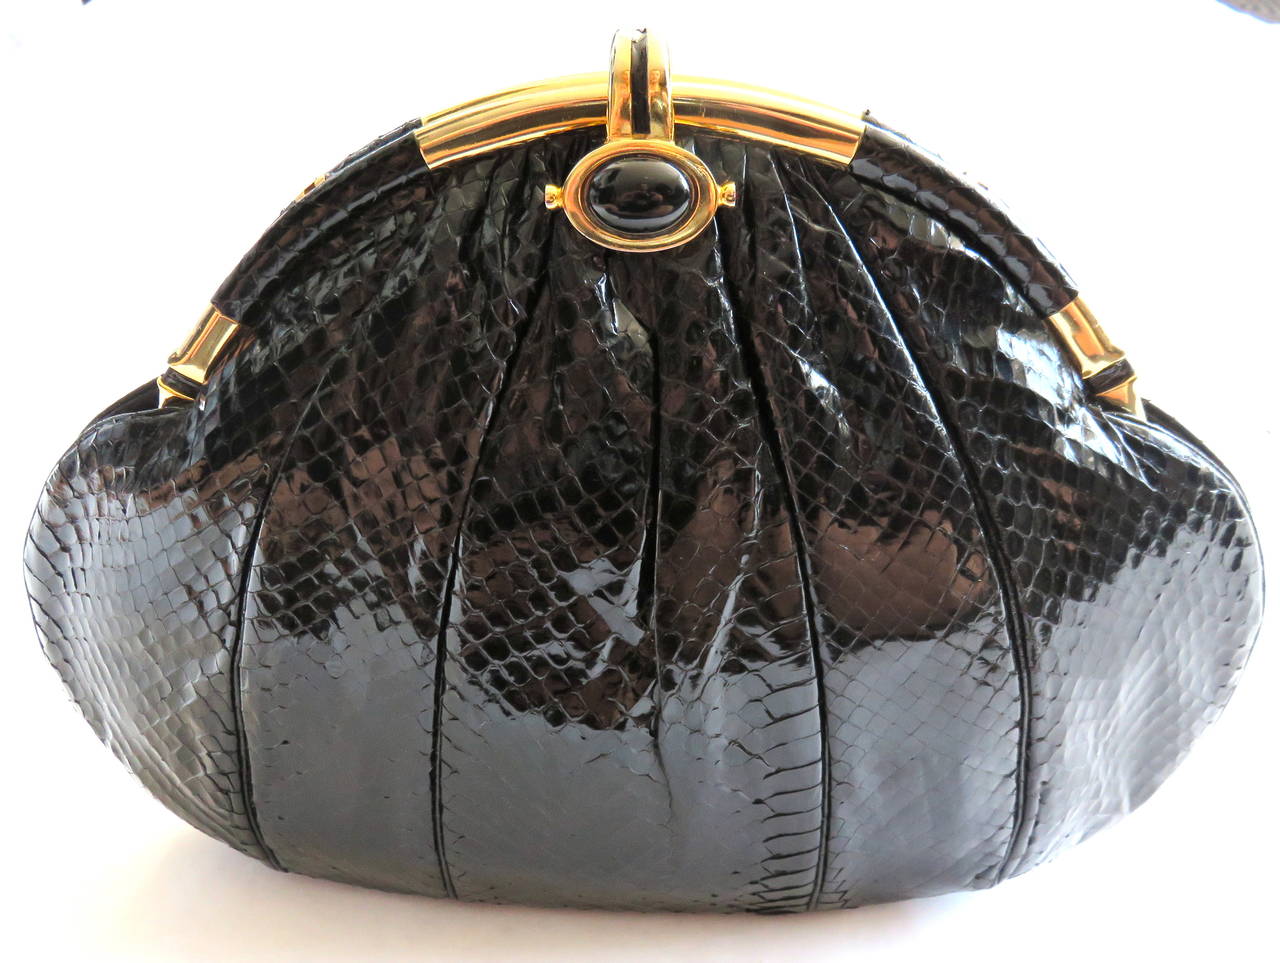 Mint condition, 1960's JUDITH LEIBER Black python evening bag.

This flawless, evening bag looks to have never been used, and is in pristine condition with absolutely no signs of wear or flaws.

Slick, glossy black python skin with metal top